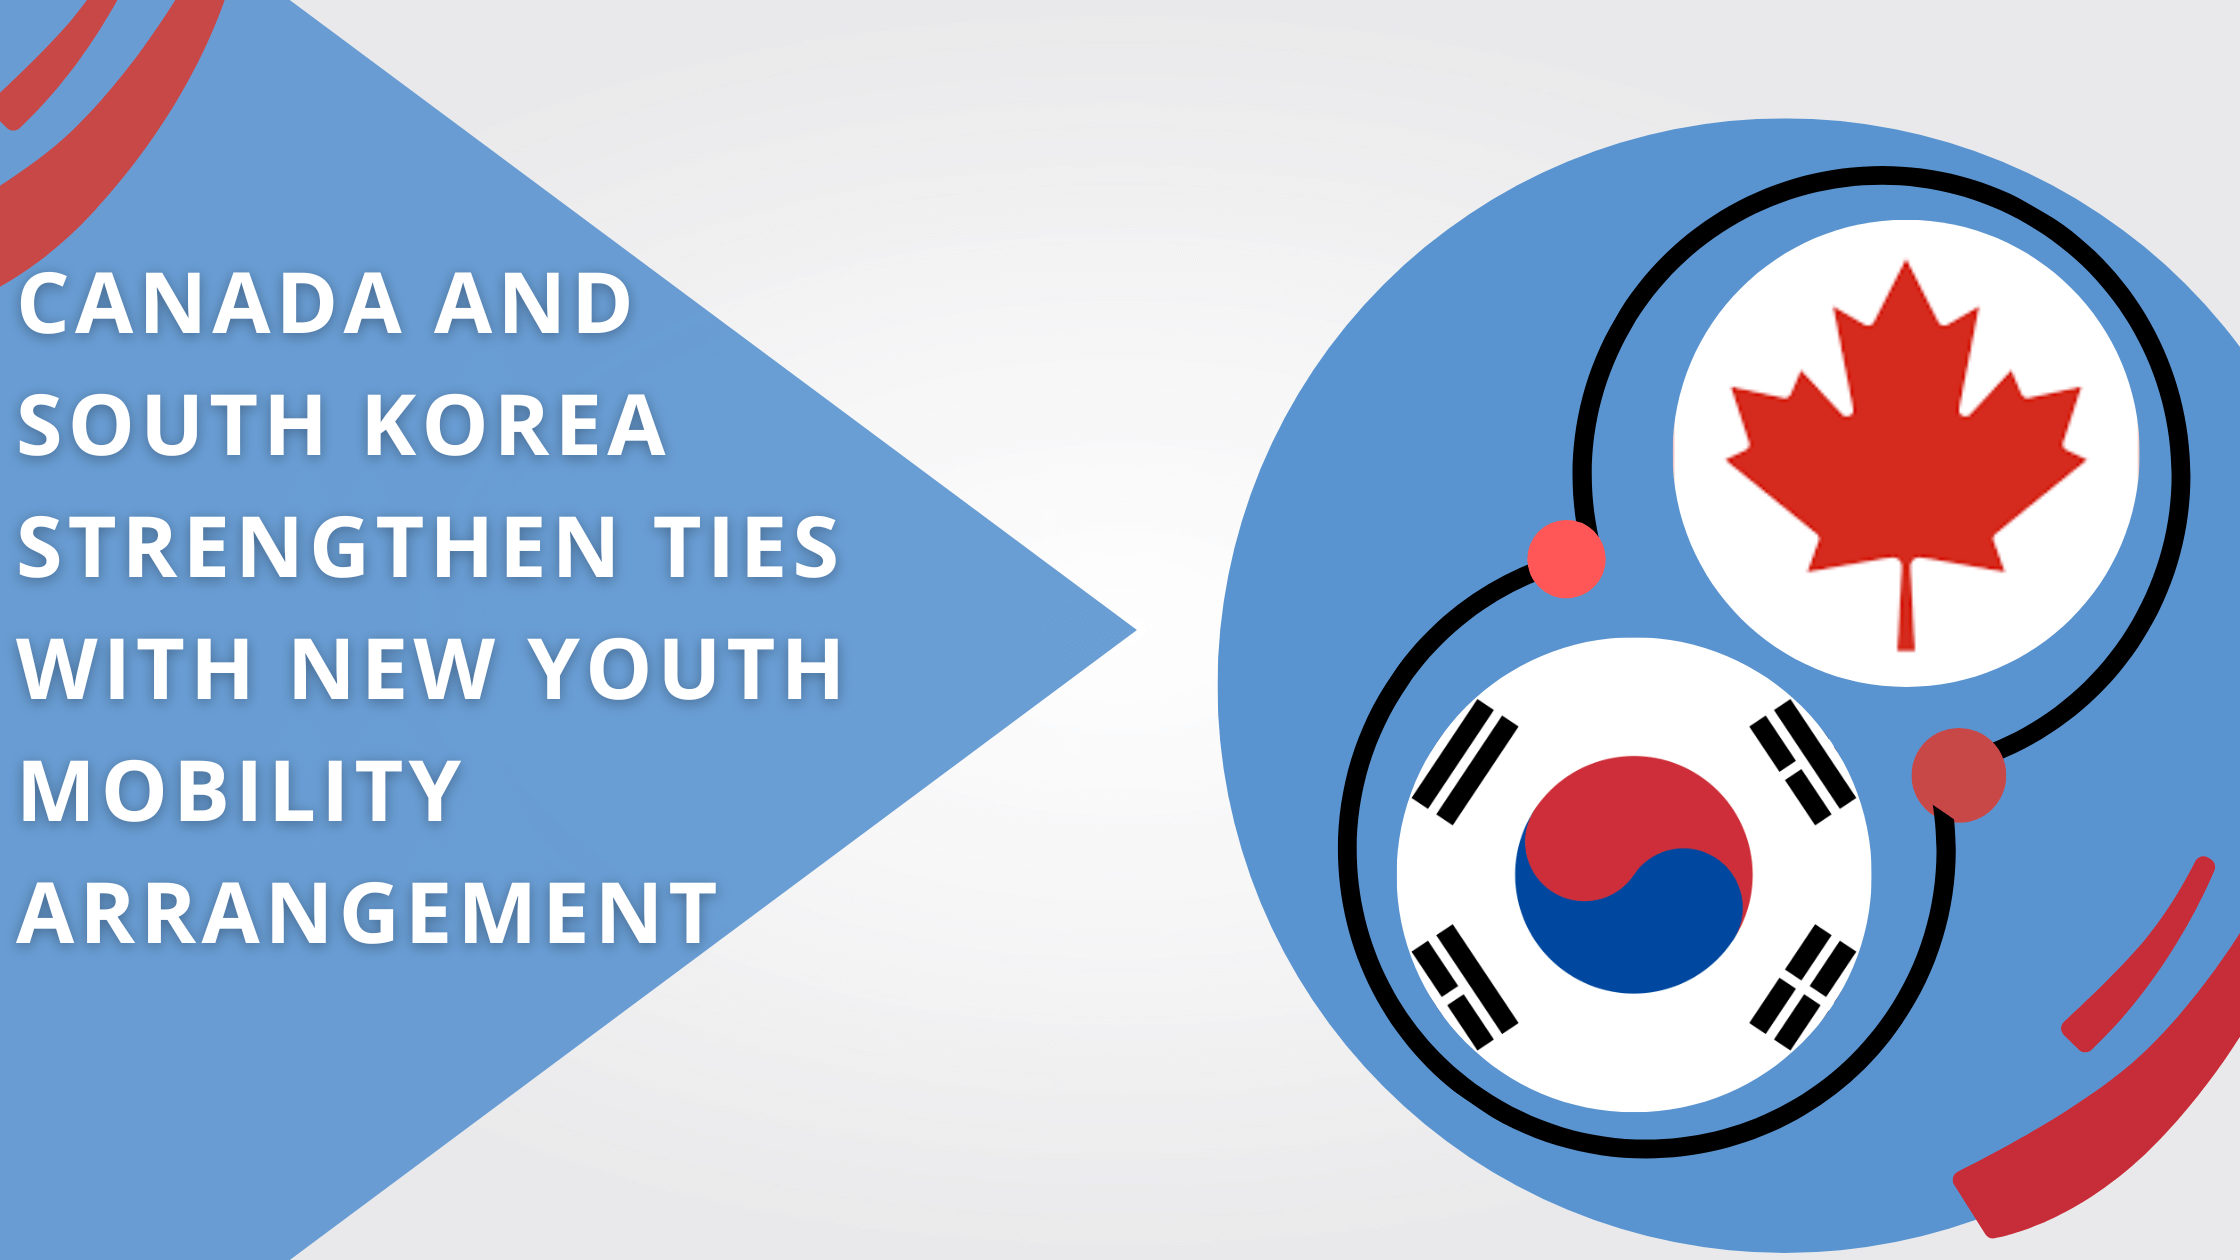 Canada and South Korea Strengthen Ties with New Youth Mobility Arrangement